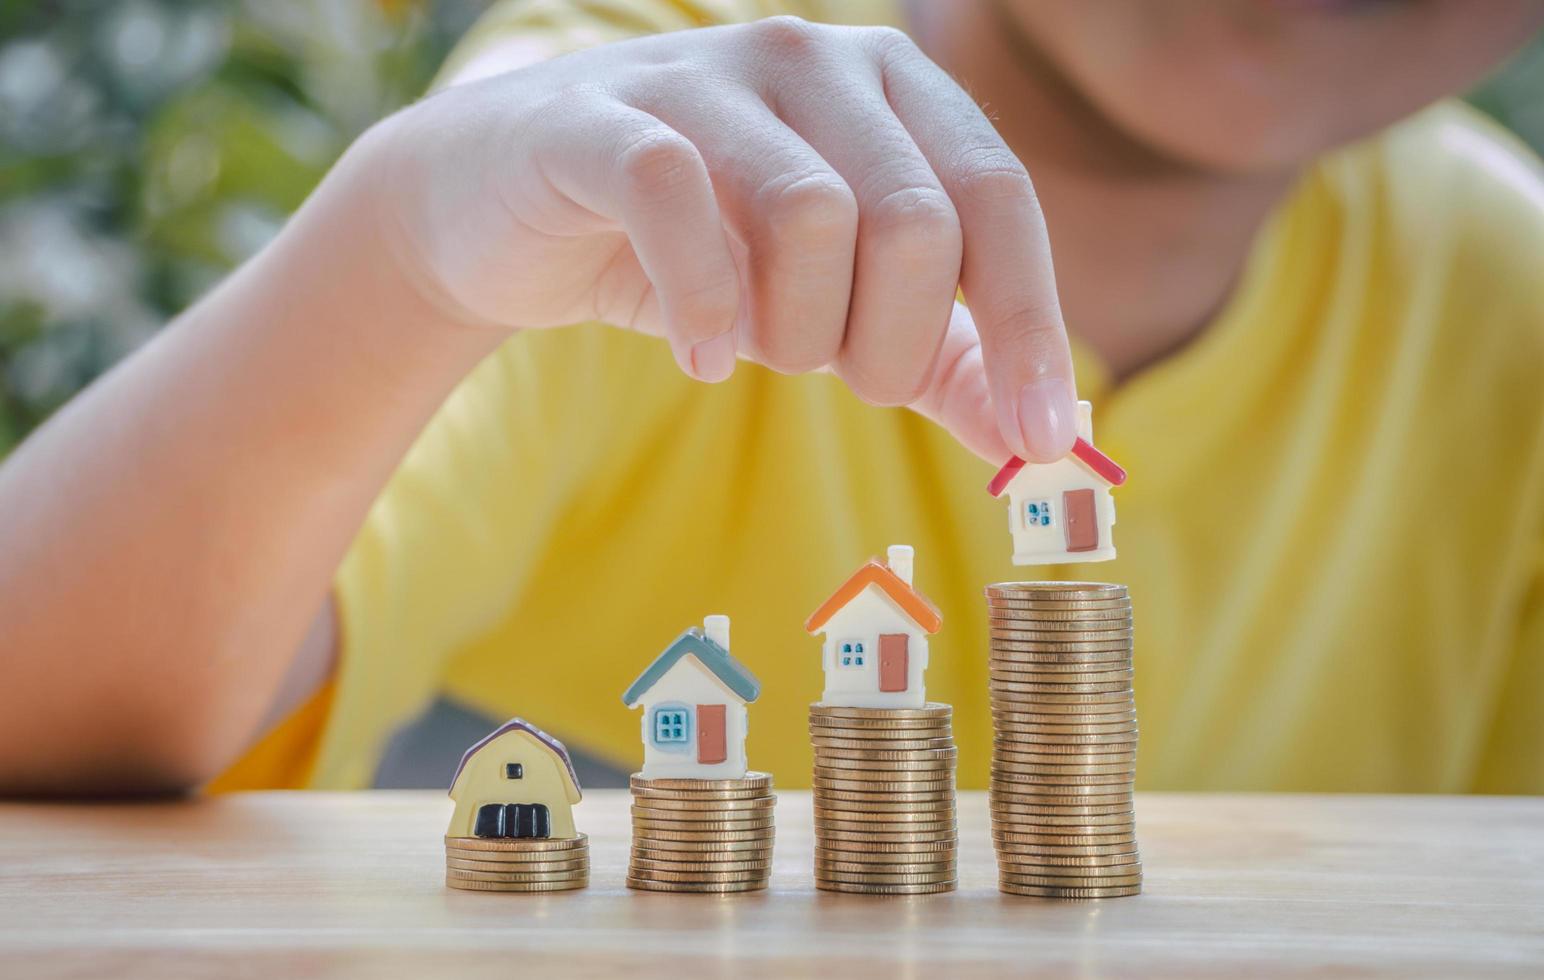 Asian boy holding home or house on gold coins stack to saving money invest for future and buy home.Concept loan, property ladder, financial, real estate investment and bonus. photo